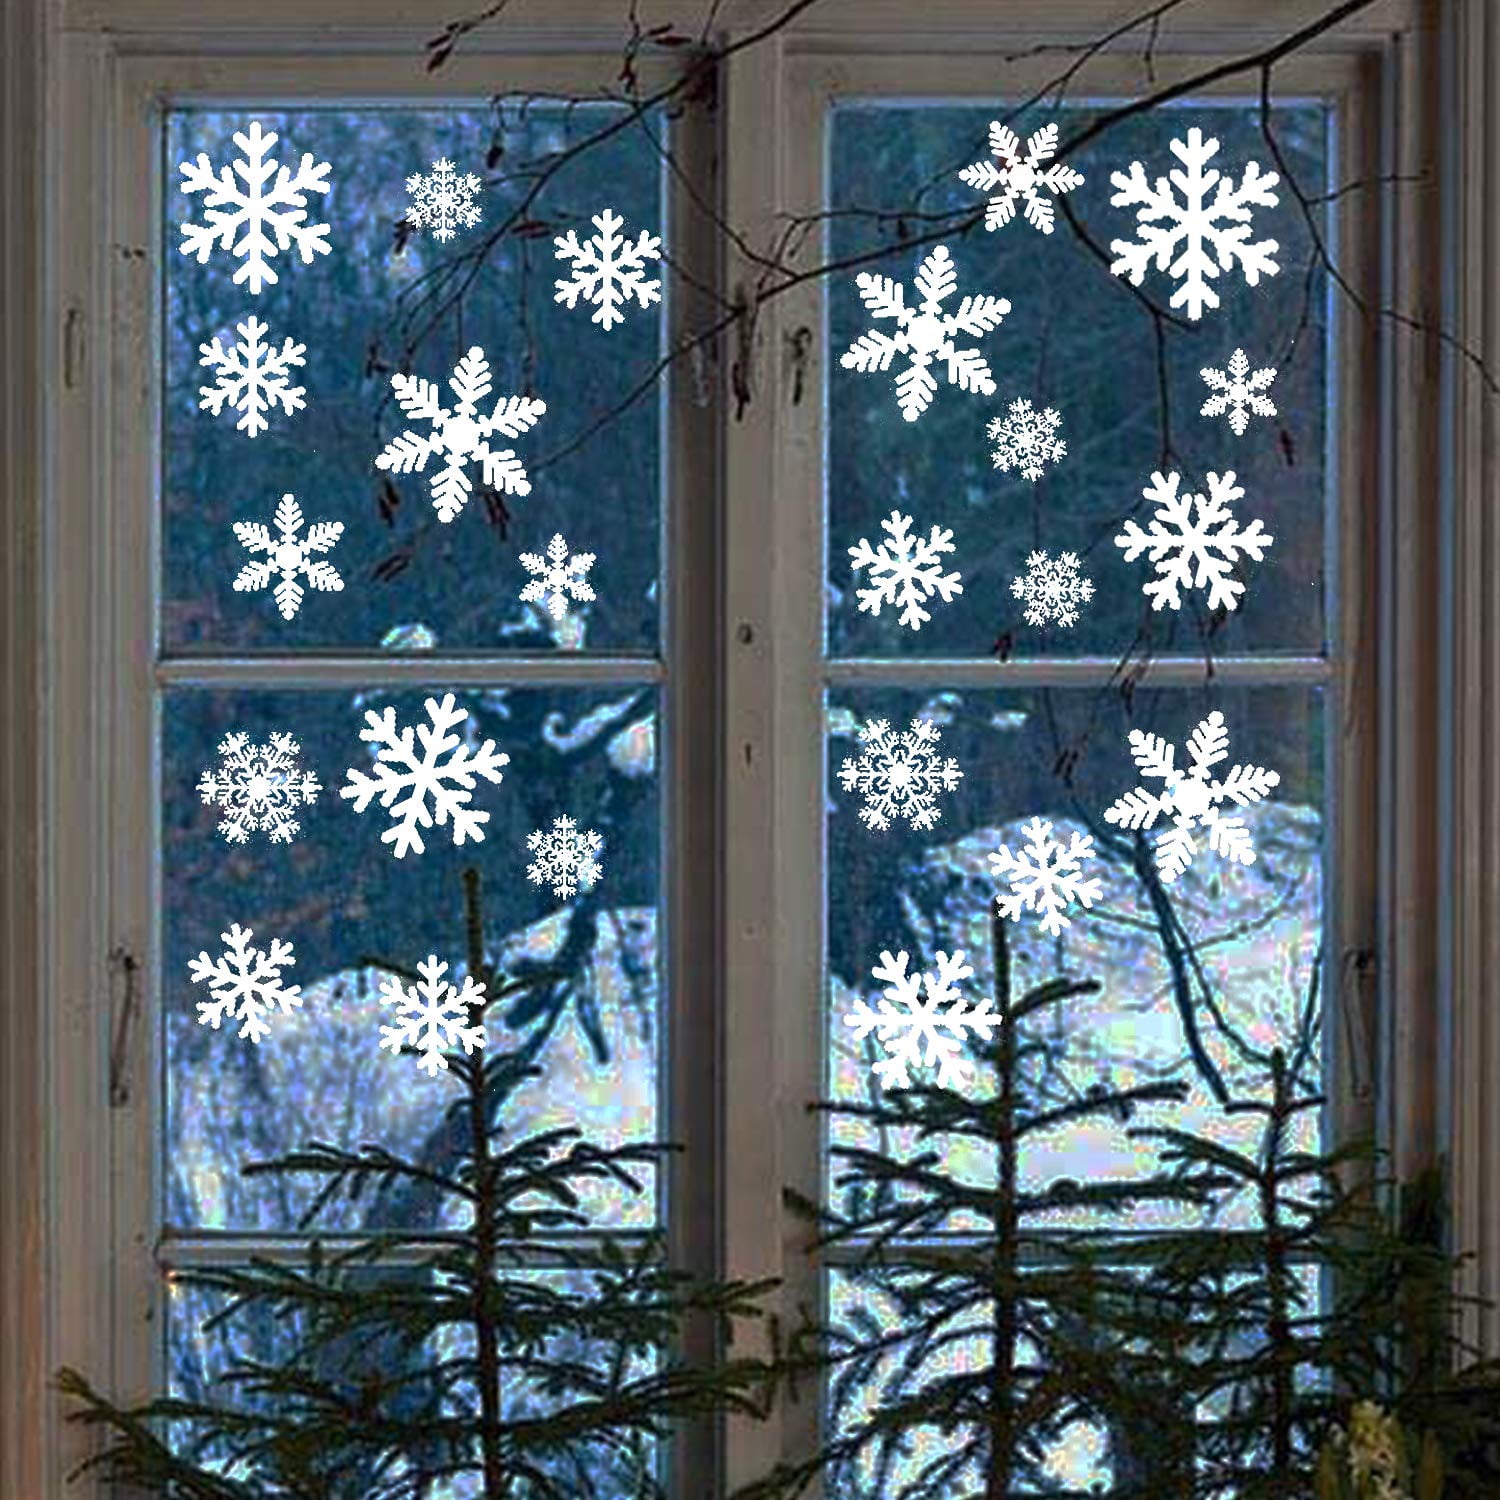 8 Sheets YNOU 216 PCS White Snowflakes Stickers Snowflakes Window Clings for Christmas Window Display Static PVC Stickers